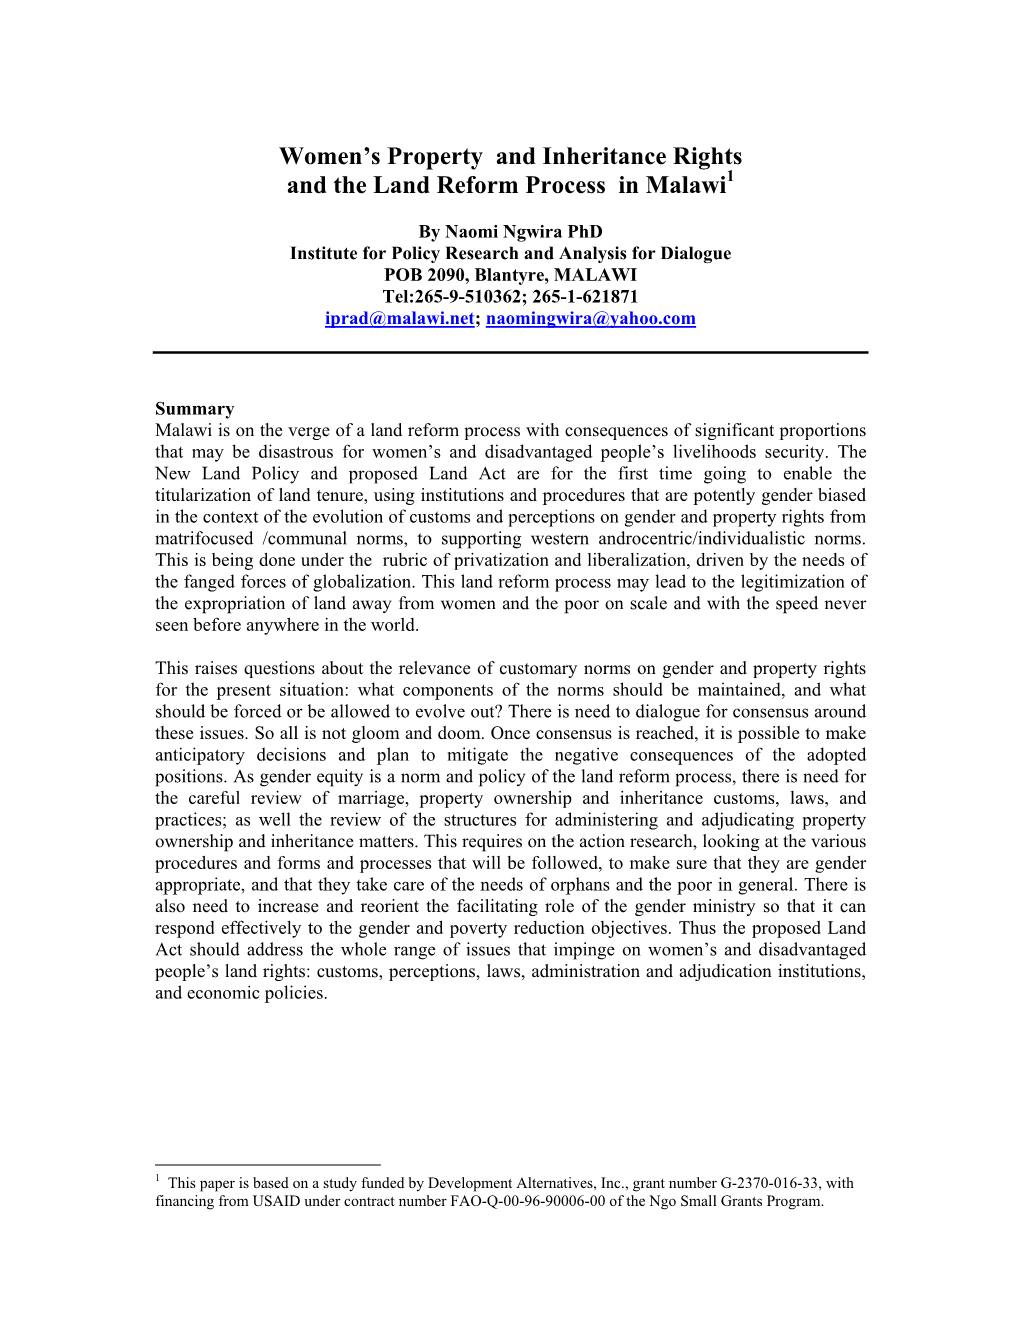 Women's Property and Inheritance Rights and the Land Reform Process in Malawi